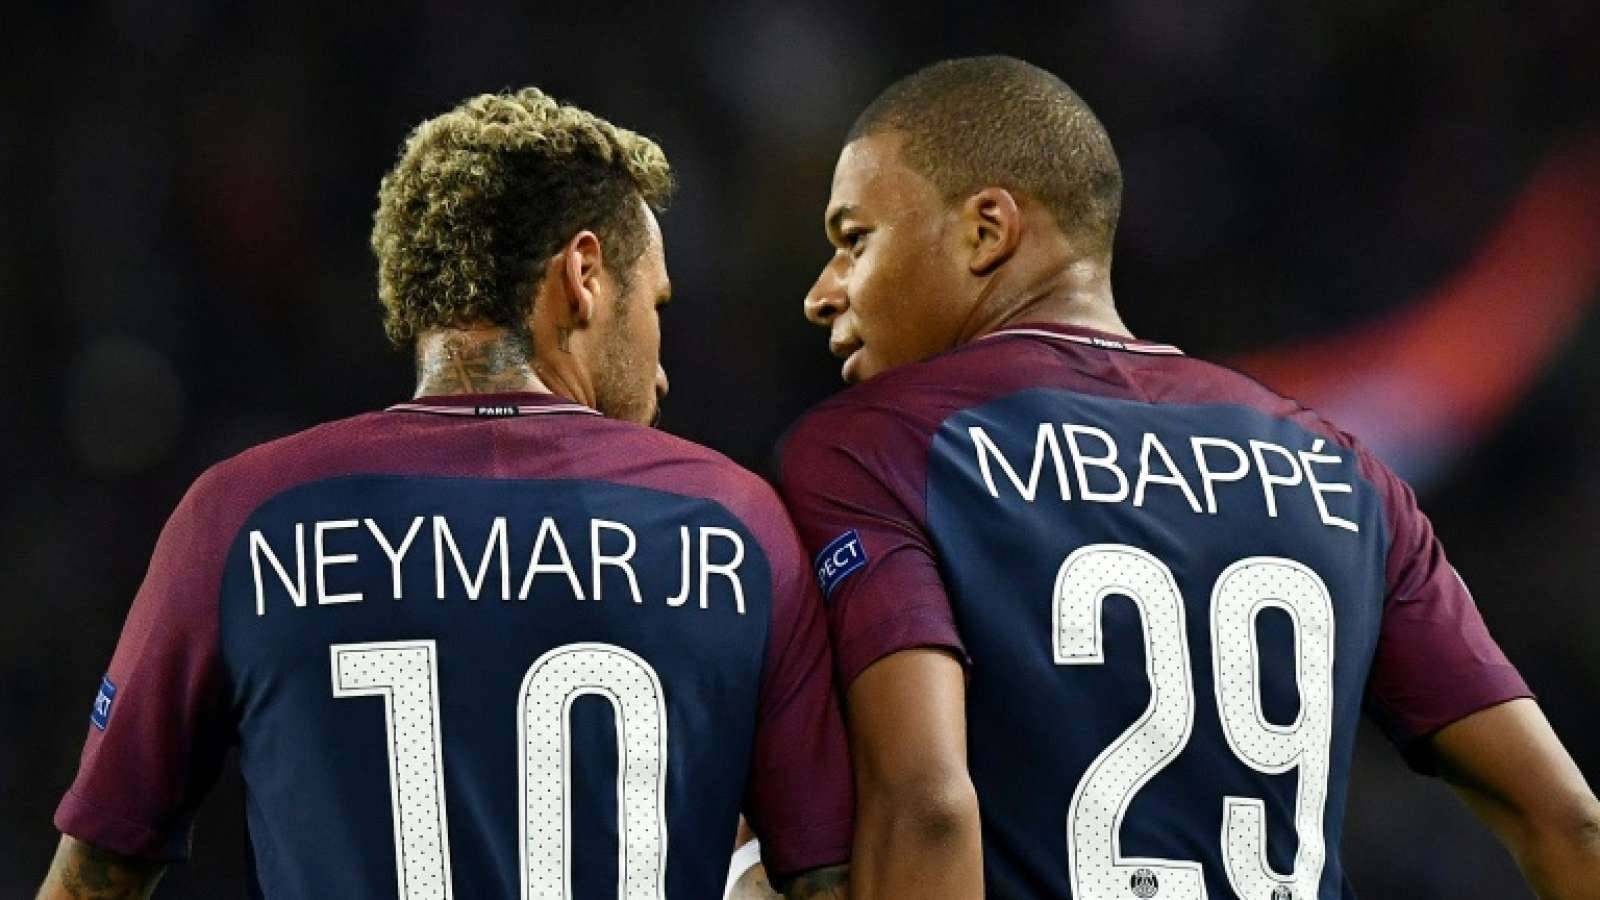 Epic Game Moment - Neymar and Mbappe Side By Side Wallpaper